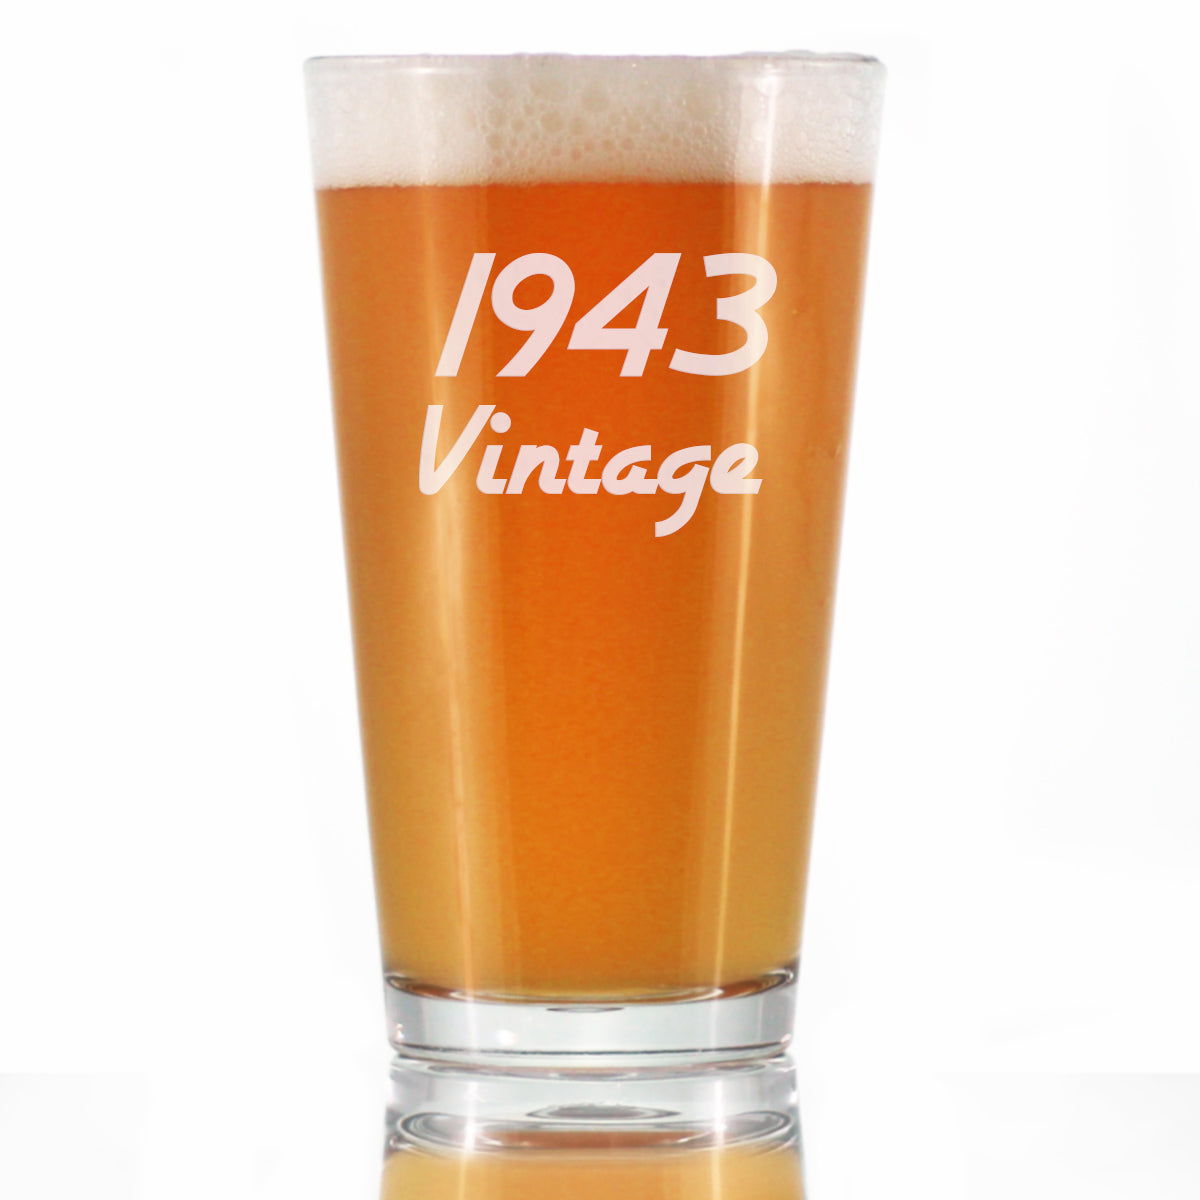 Vintage 1943 - Pint Glass for Beer - 80th Birthday Gifts for Men or Women Turning 80 - Fun Bday Party Decor - 16 oz